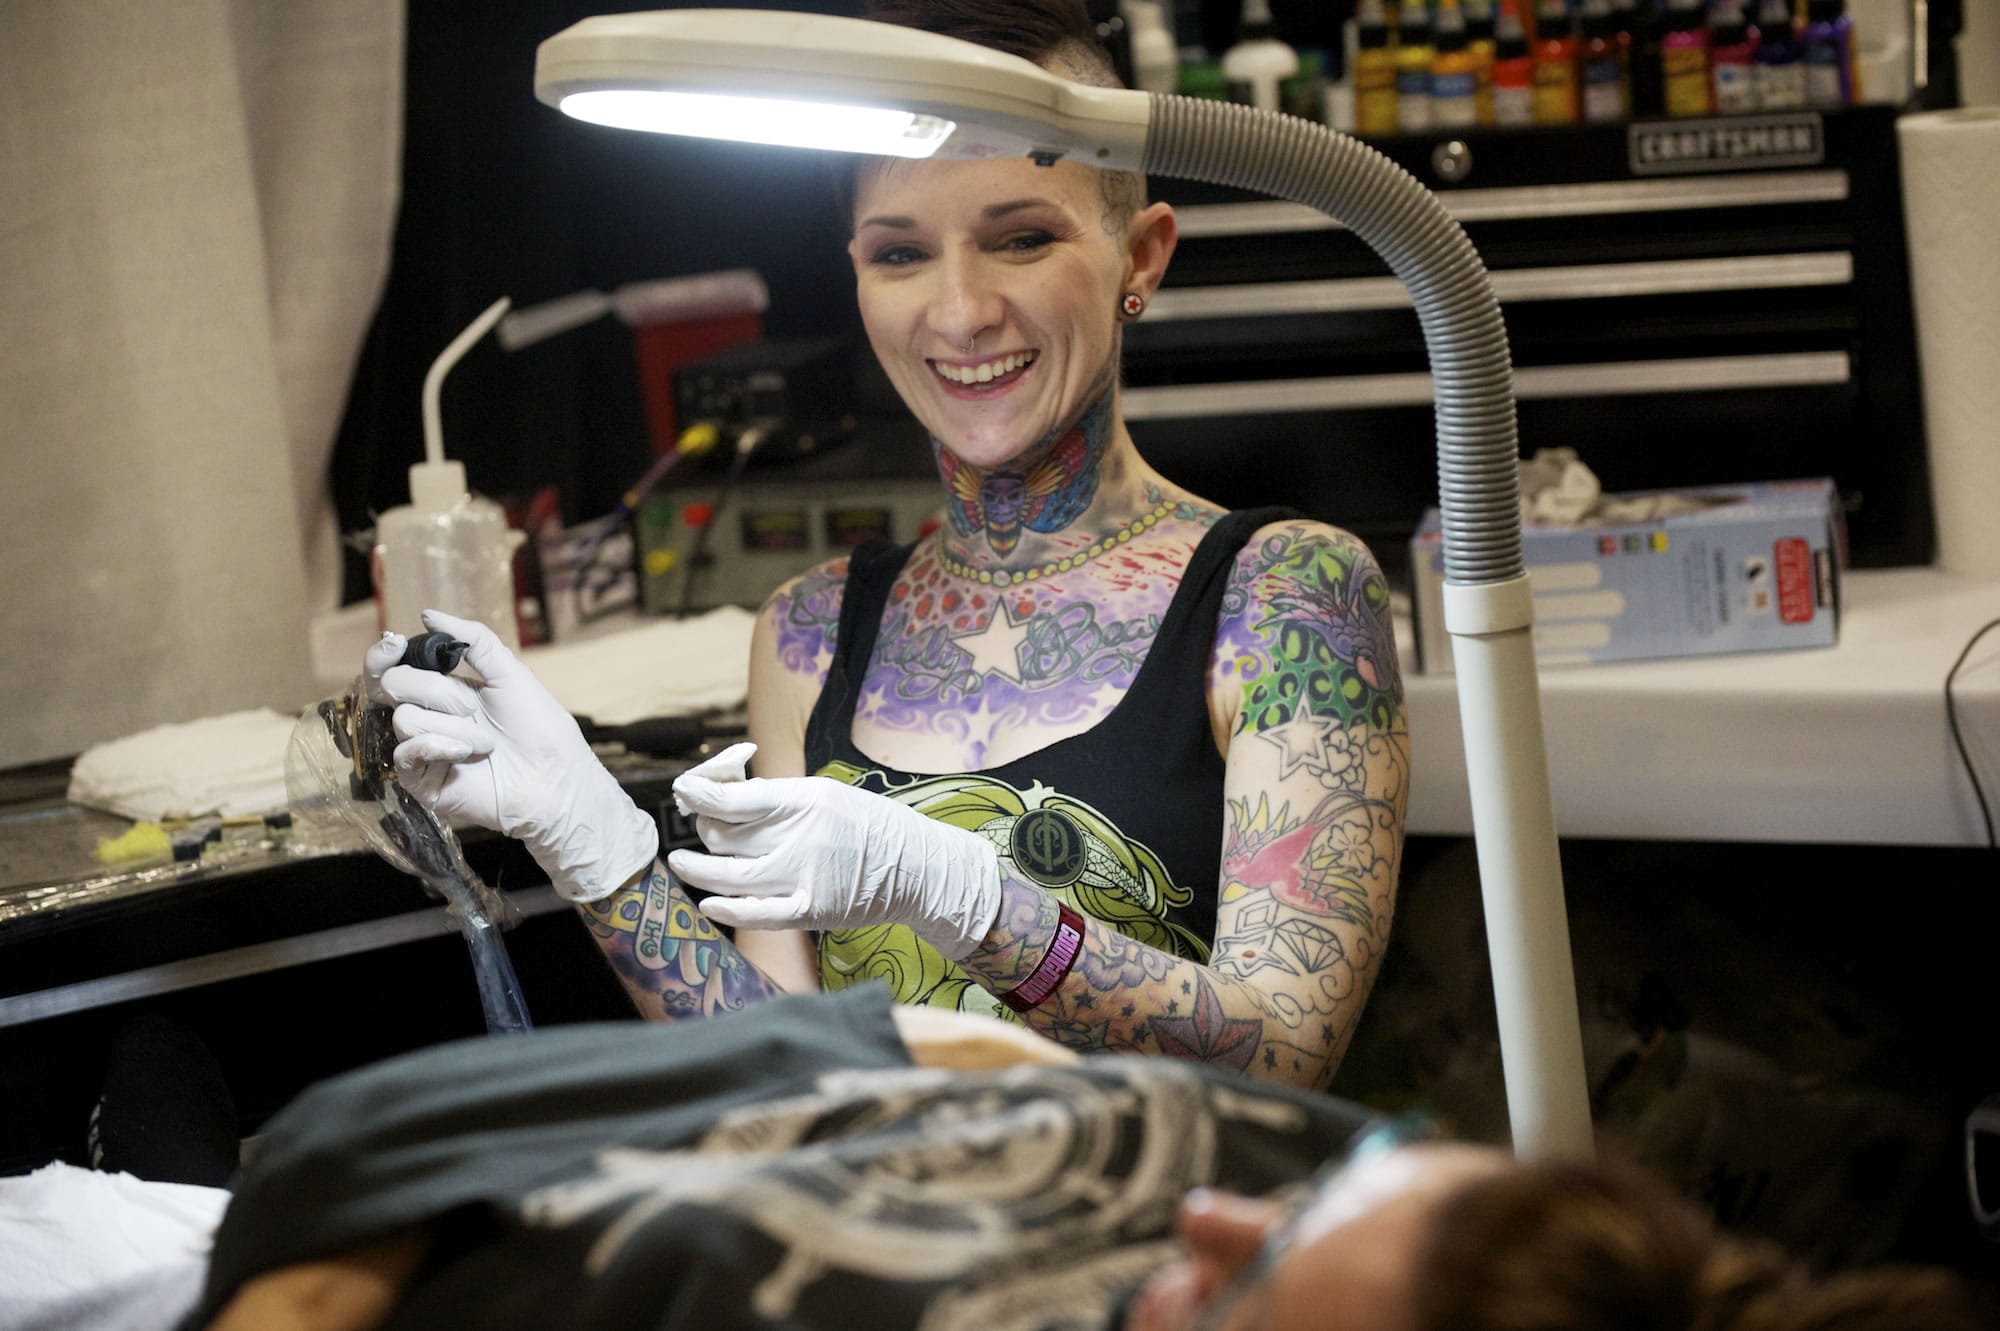 Tattooists in sync with ink at Body Art Expo - The Columbian